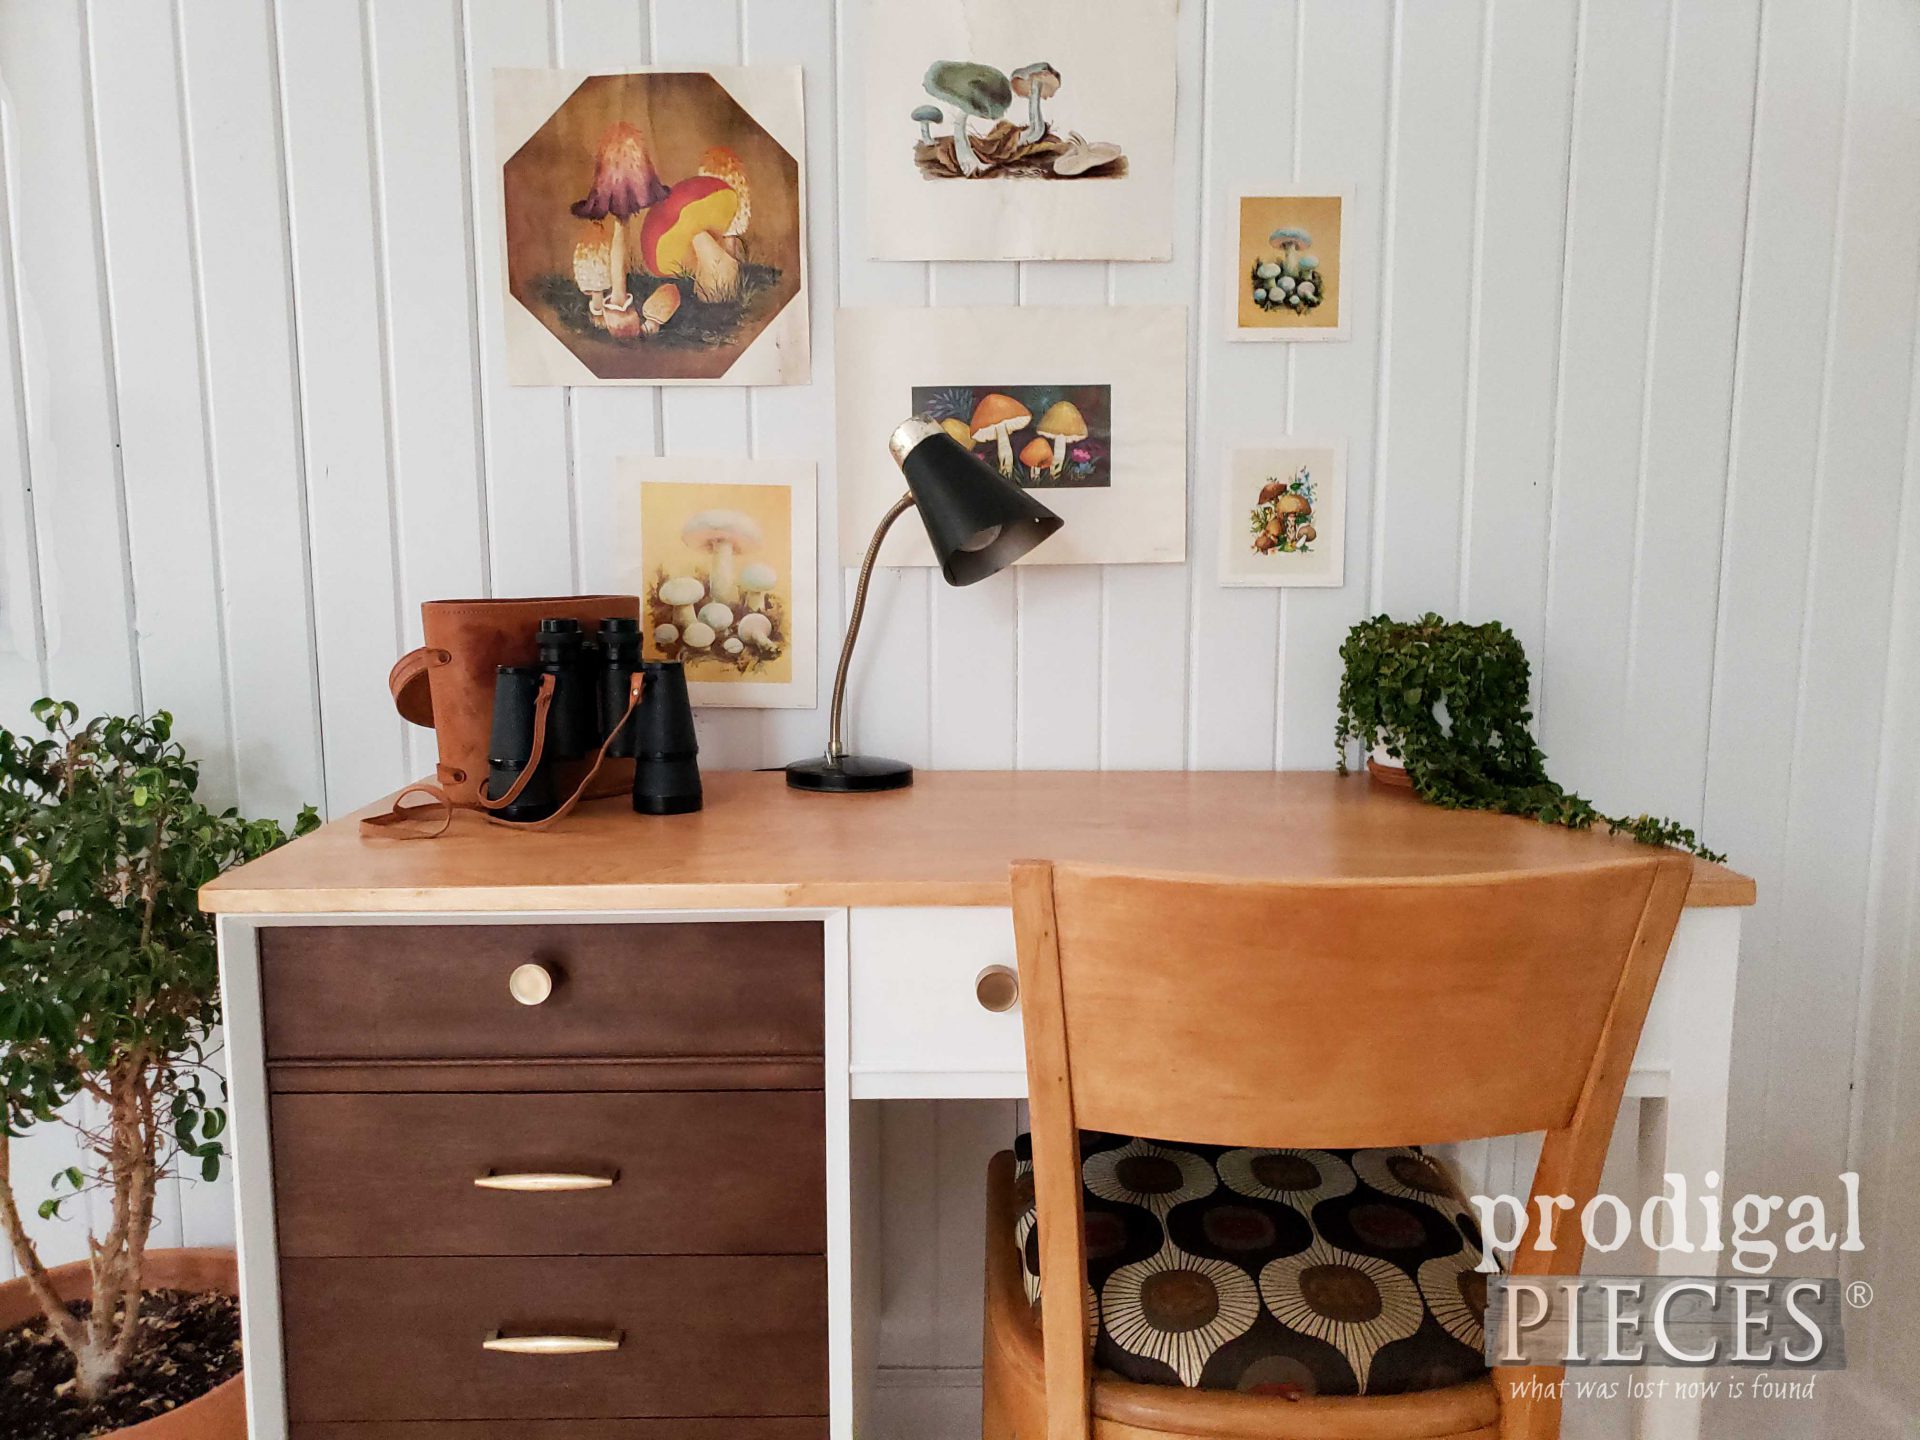 Restored Mid Century Sewing Desk becomes Desk Set with Retro Funk by Larissa of Prodigal Pieces | prodigalpieces.com #prodigalpieces #midcentury #vintage #furniture #diy #home #homedecor